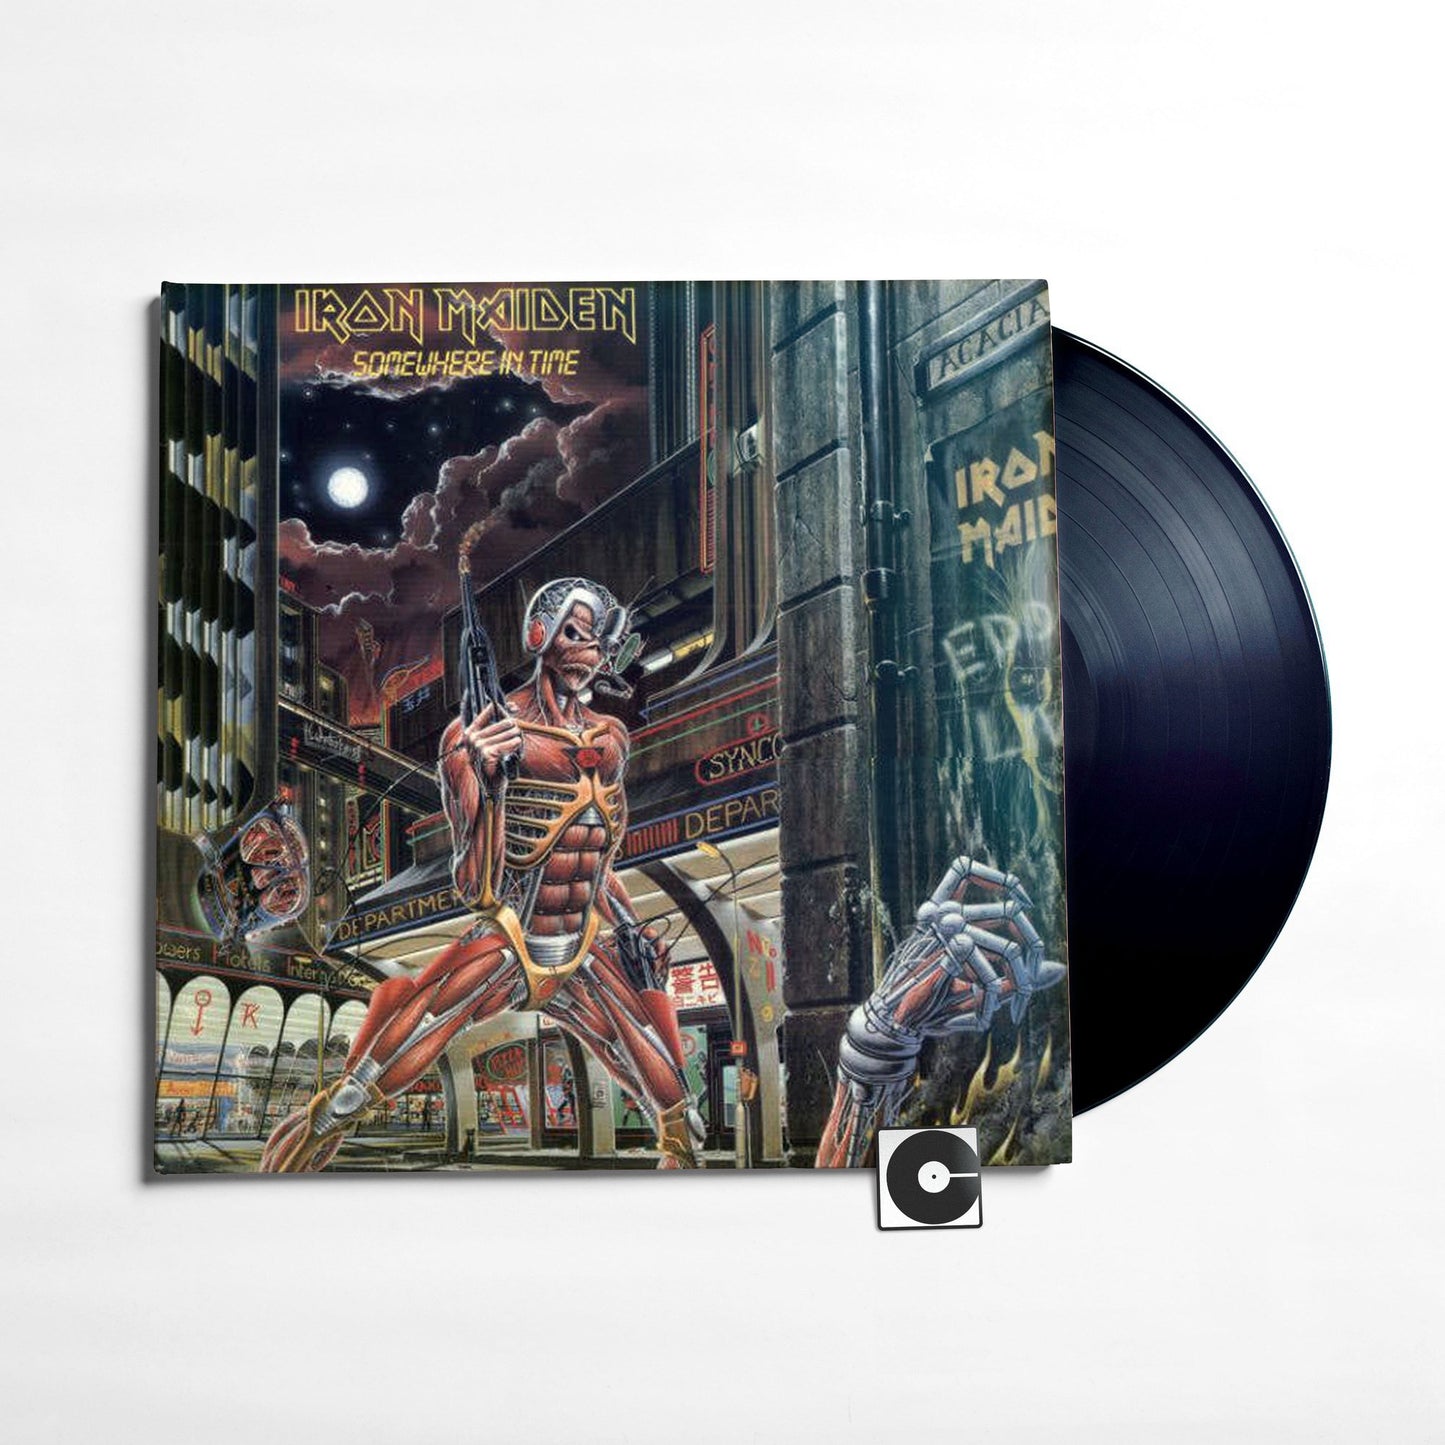 Iron Maiden - "Somewhere In Time"